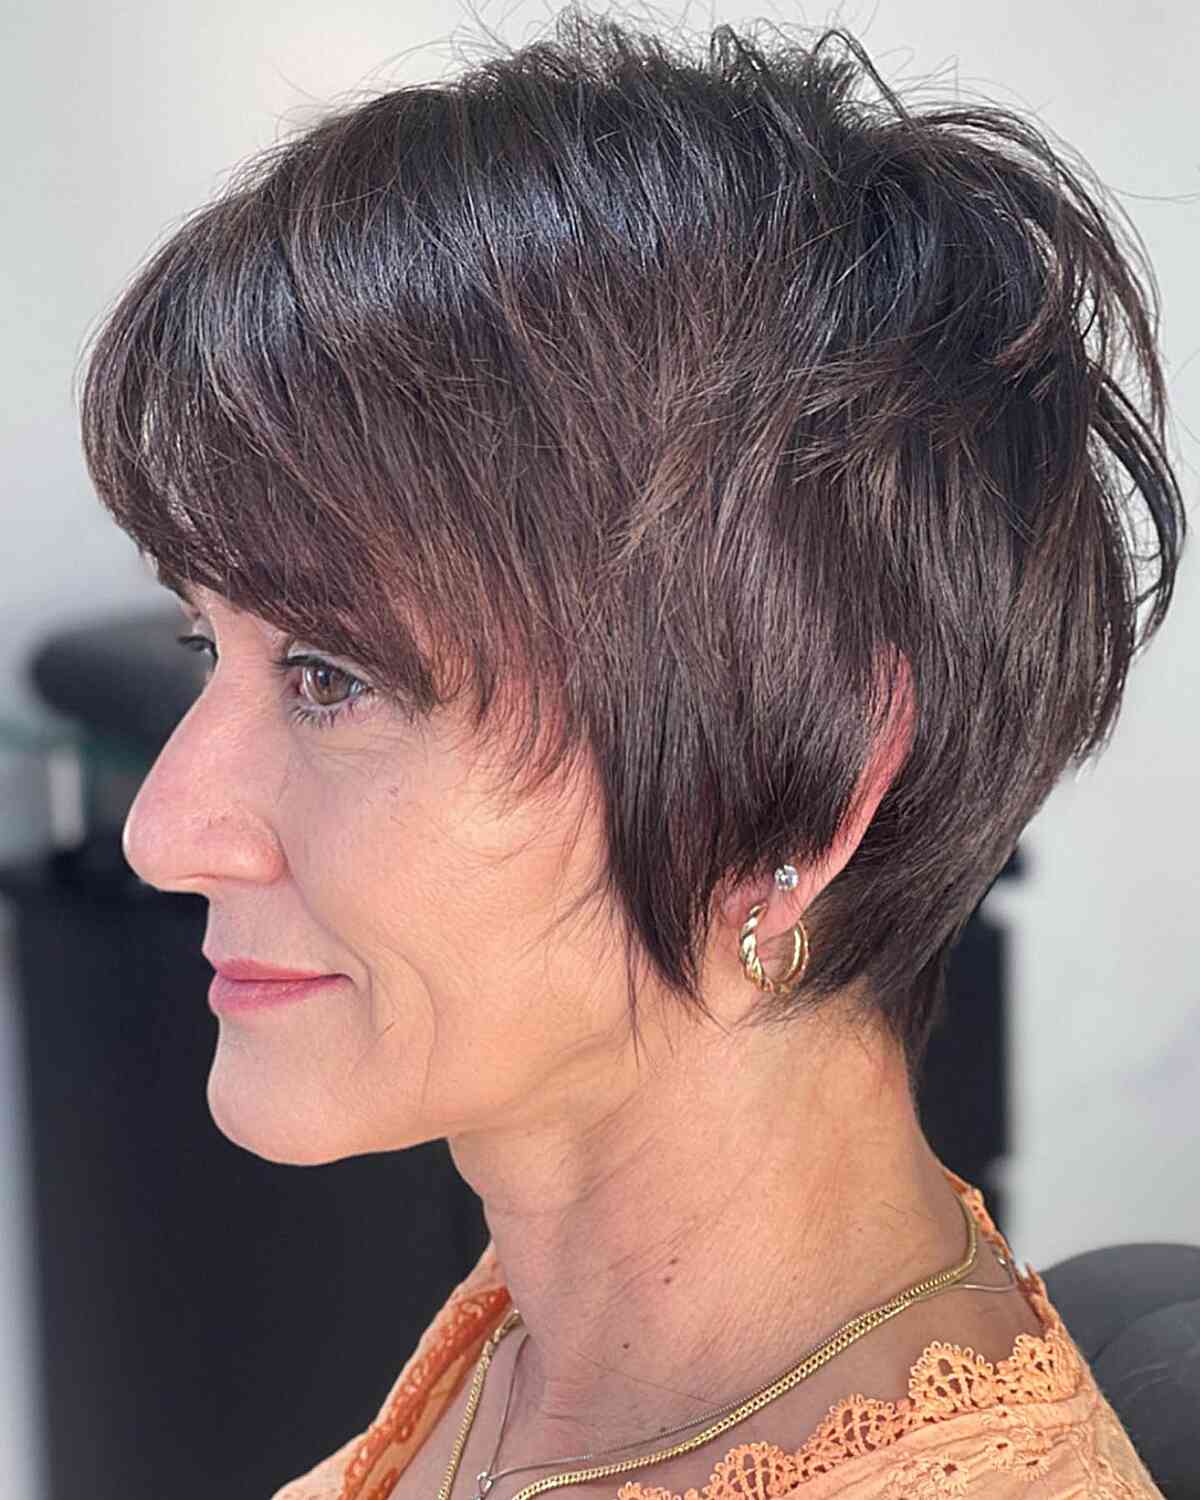 Chic Wixie Pixie Haircut for ladies aged 50 and over with straight hair